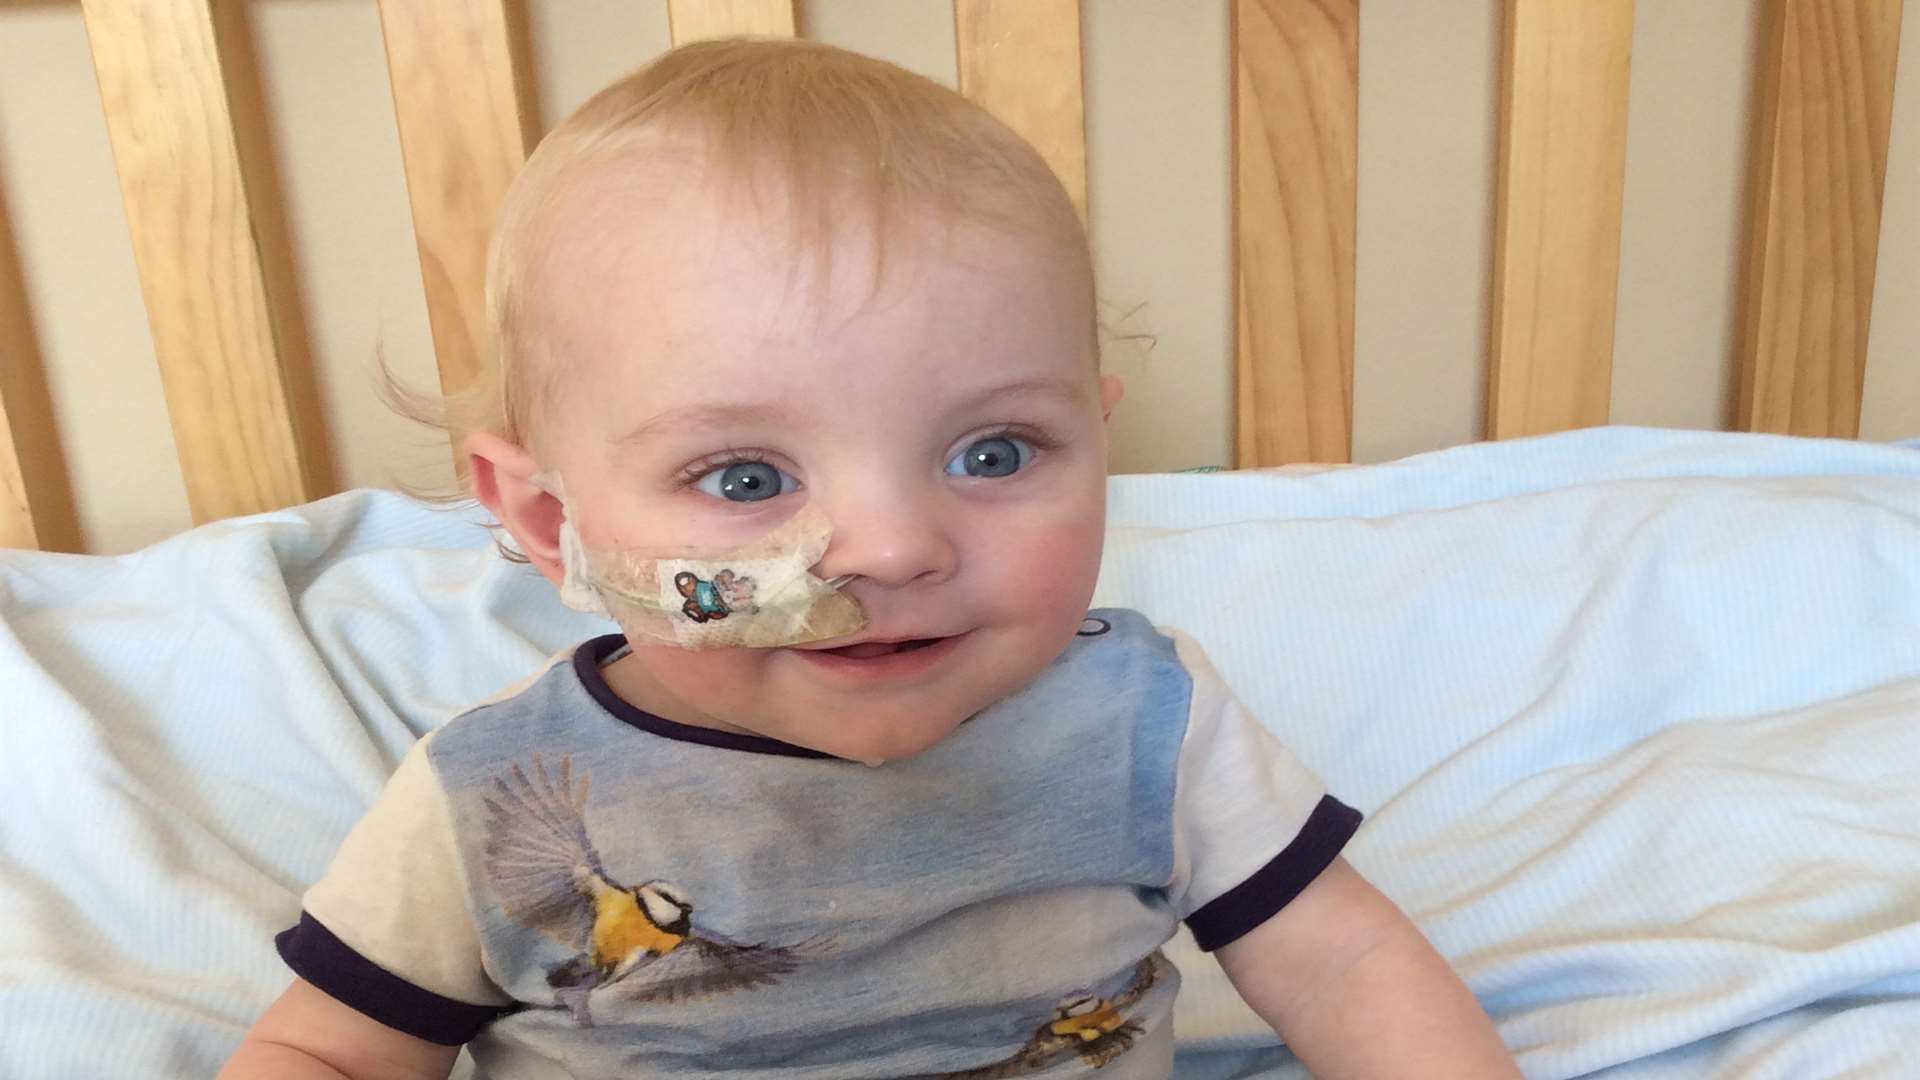 Arthur was diagnosed with Severe Combined Immune Deficiency (SCID)